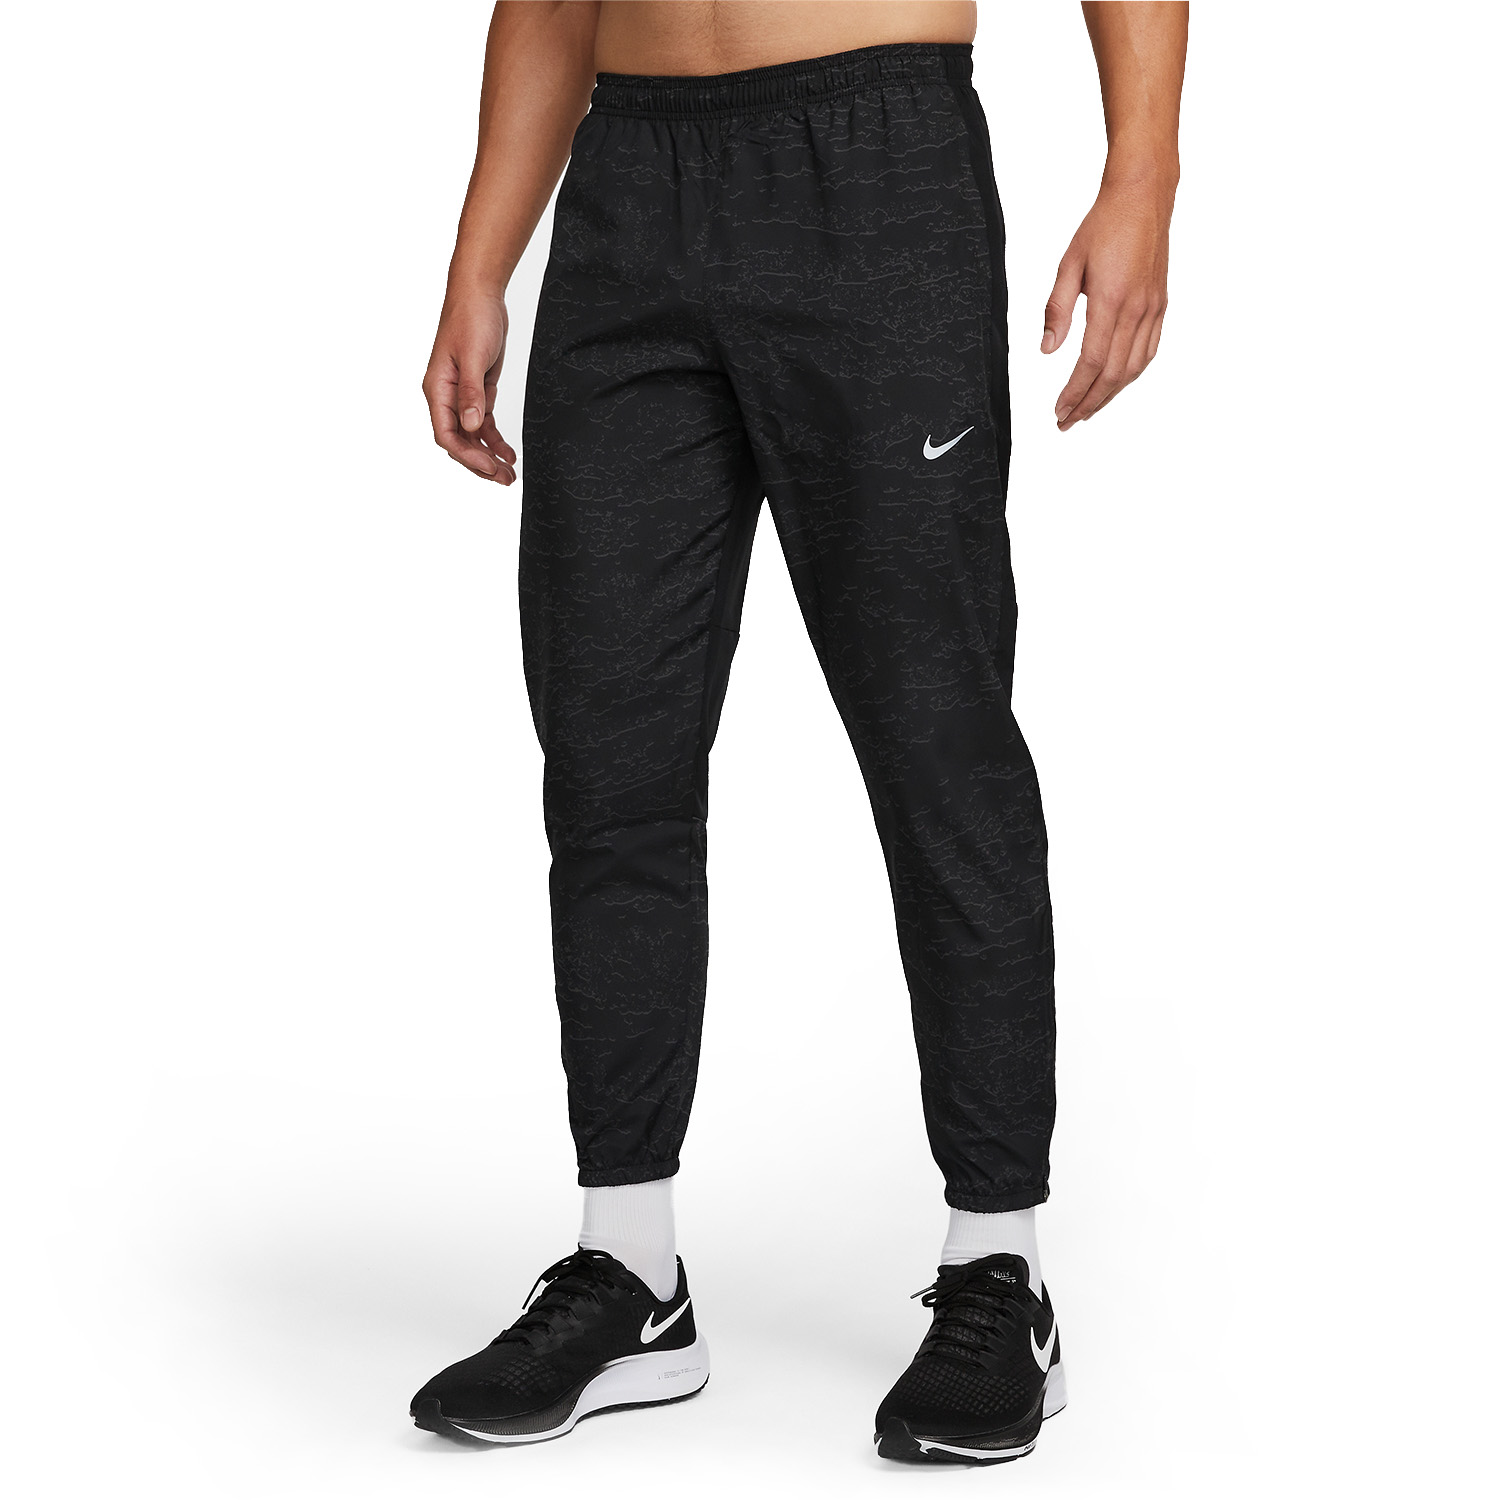 The Best Nike Running Pants Reviewed in 2022| RunnerClick